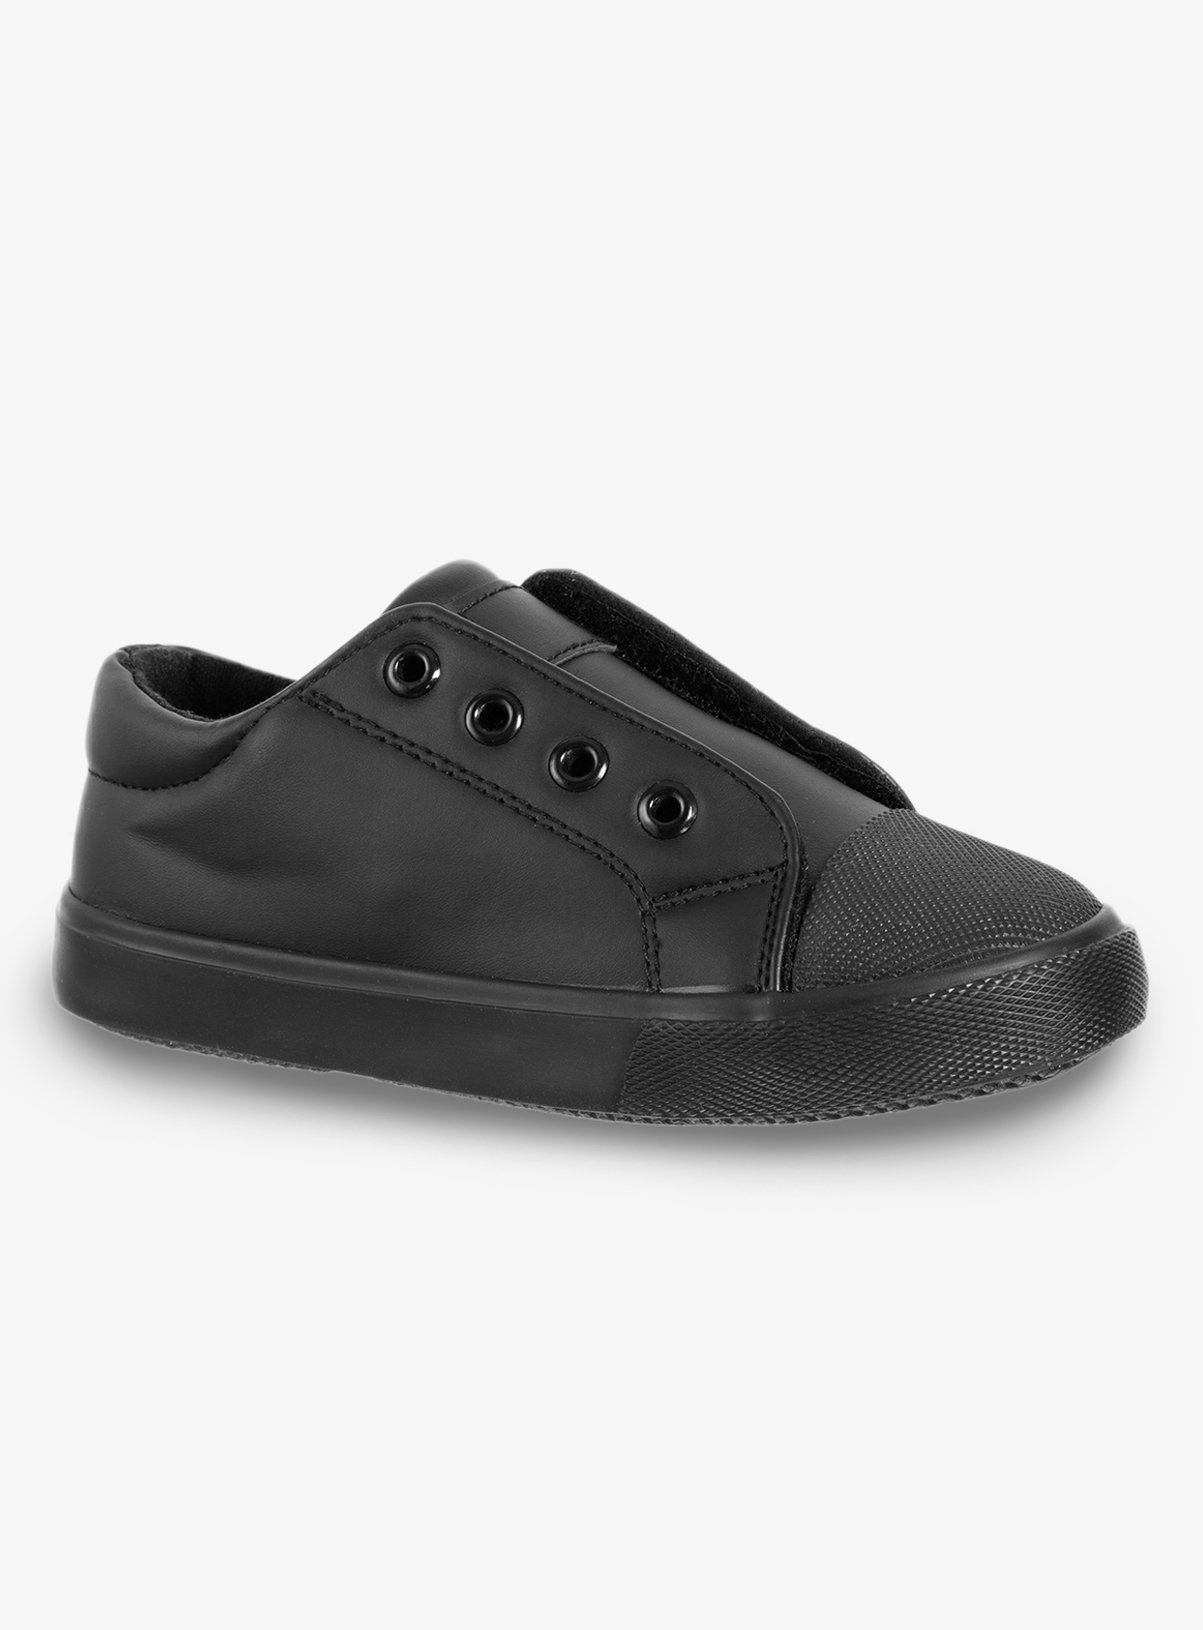 black no lace trainers